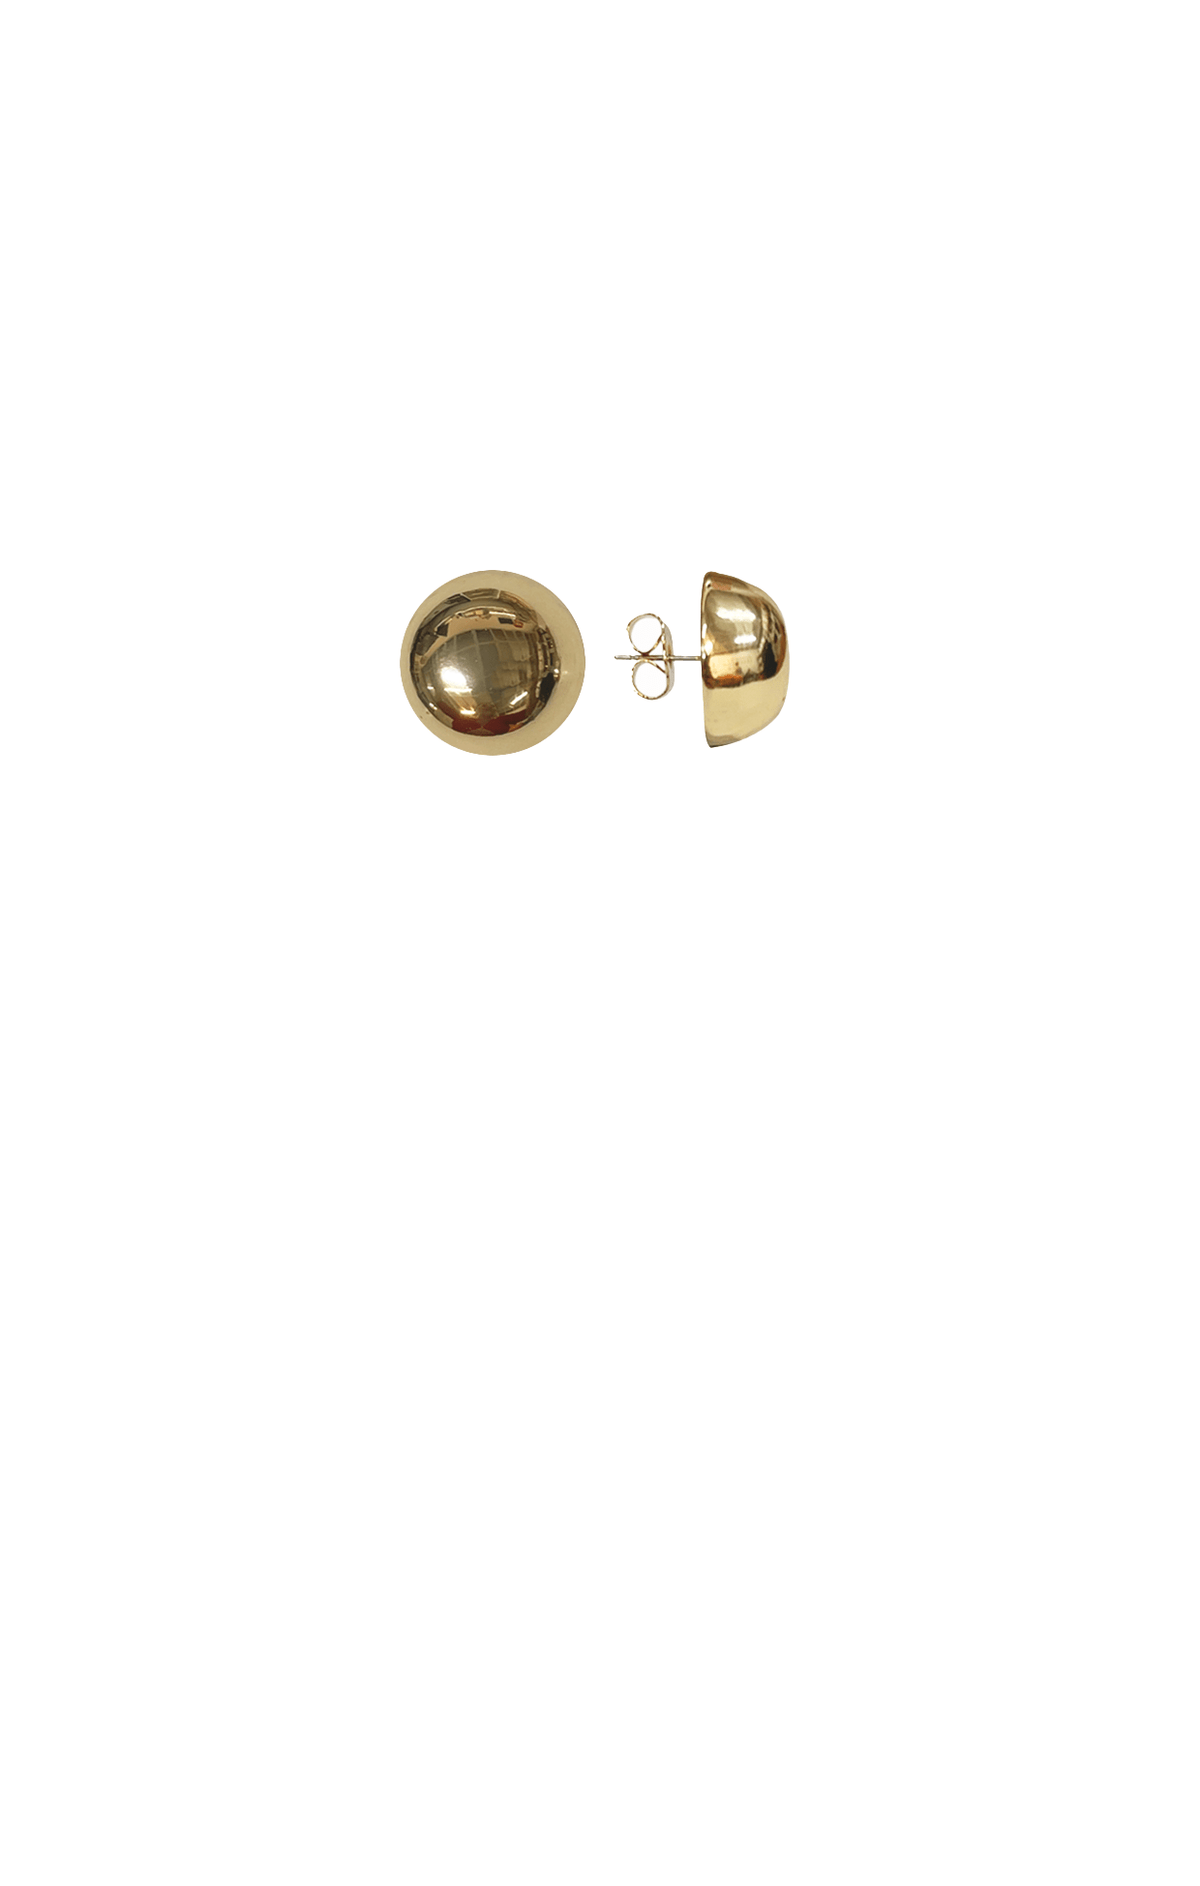 ACCESSORIES Earrings OS / GOLD POLISHED DOME STUD EARRING IN GOLD